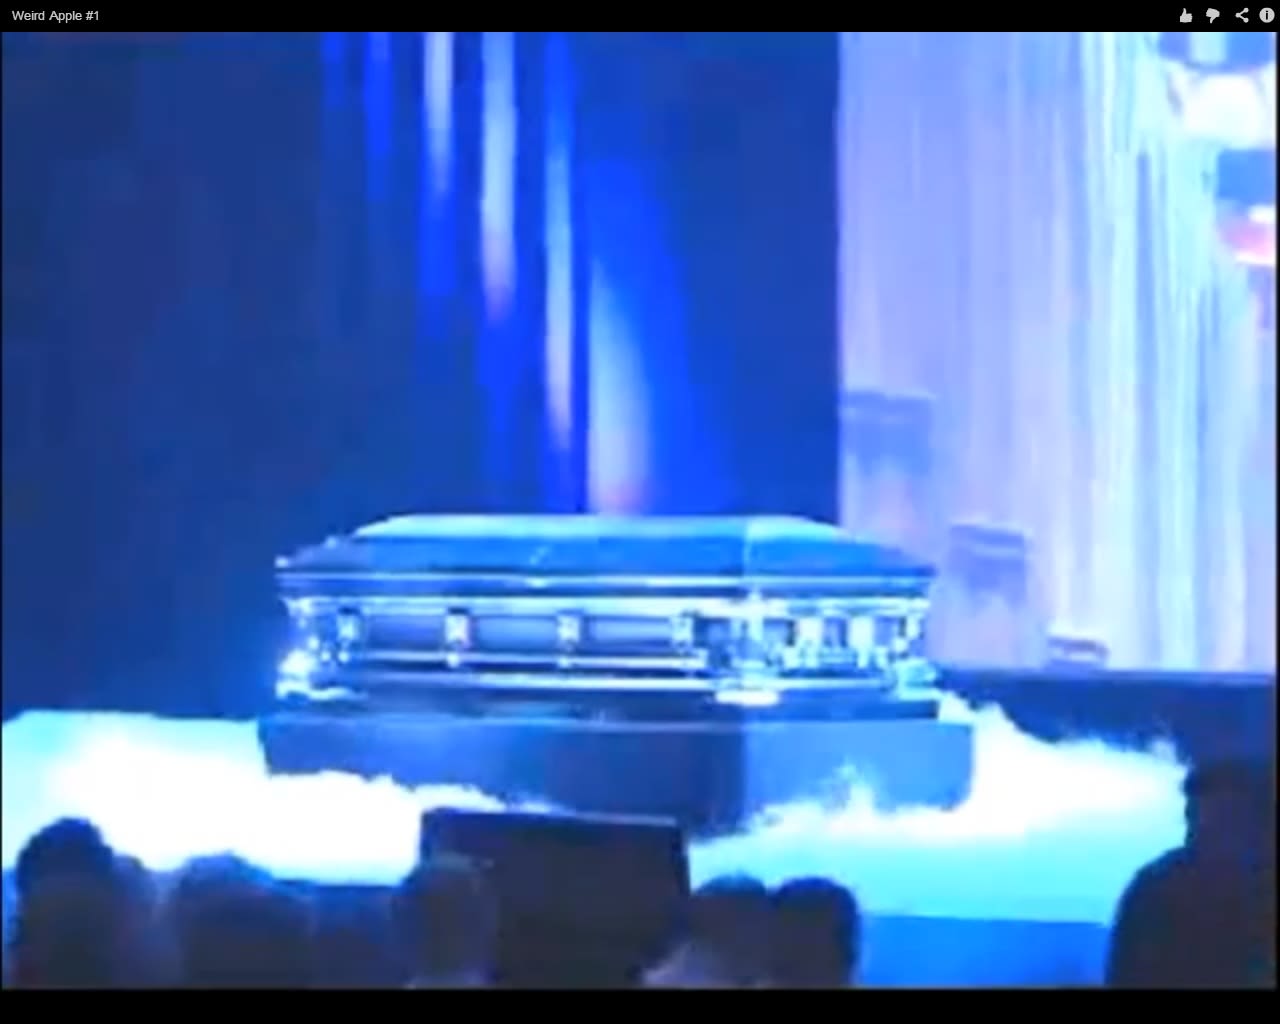 At the 2002 WWDC, Jobs presided over a theatrical mock funeral for Apple's OS 9 operating system, complete with casket, fog and organ music. "It's been a good friend," he said.